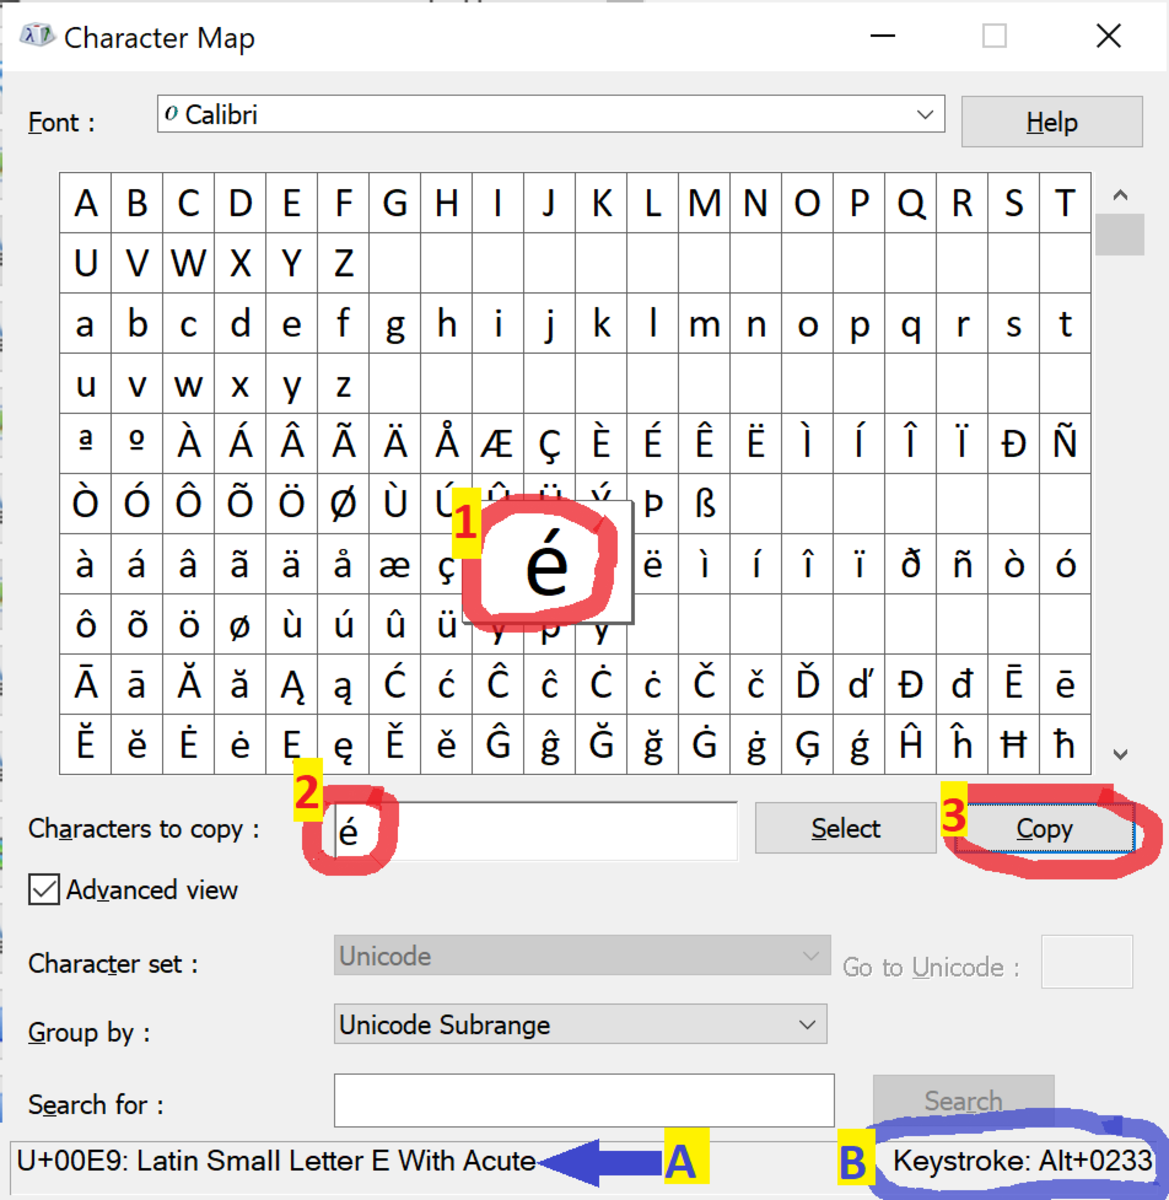 Character Map with the character "é" selected and copied.